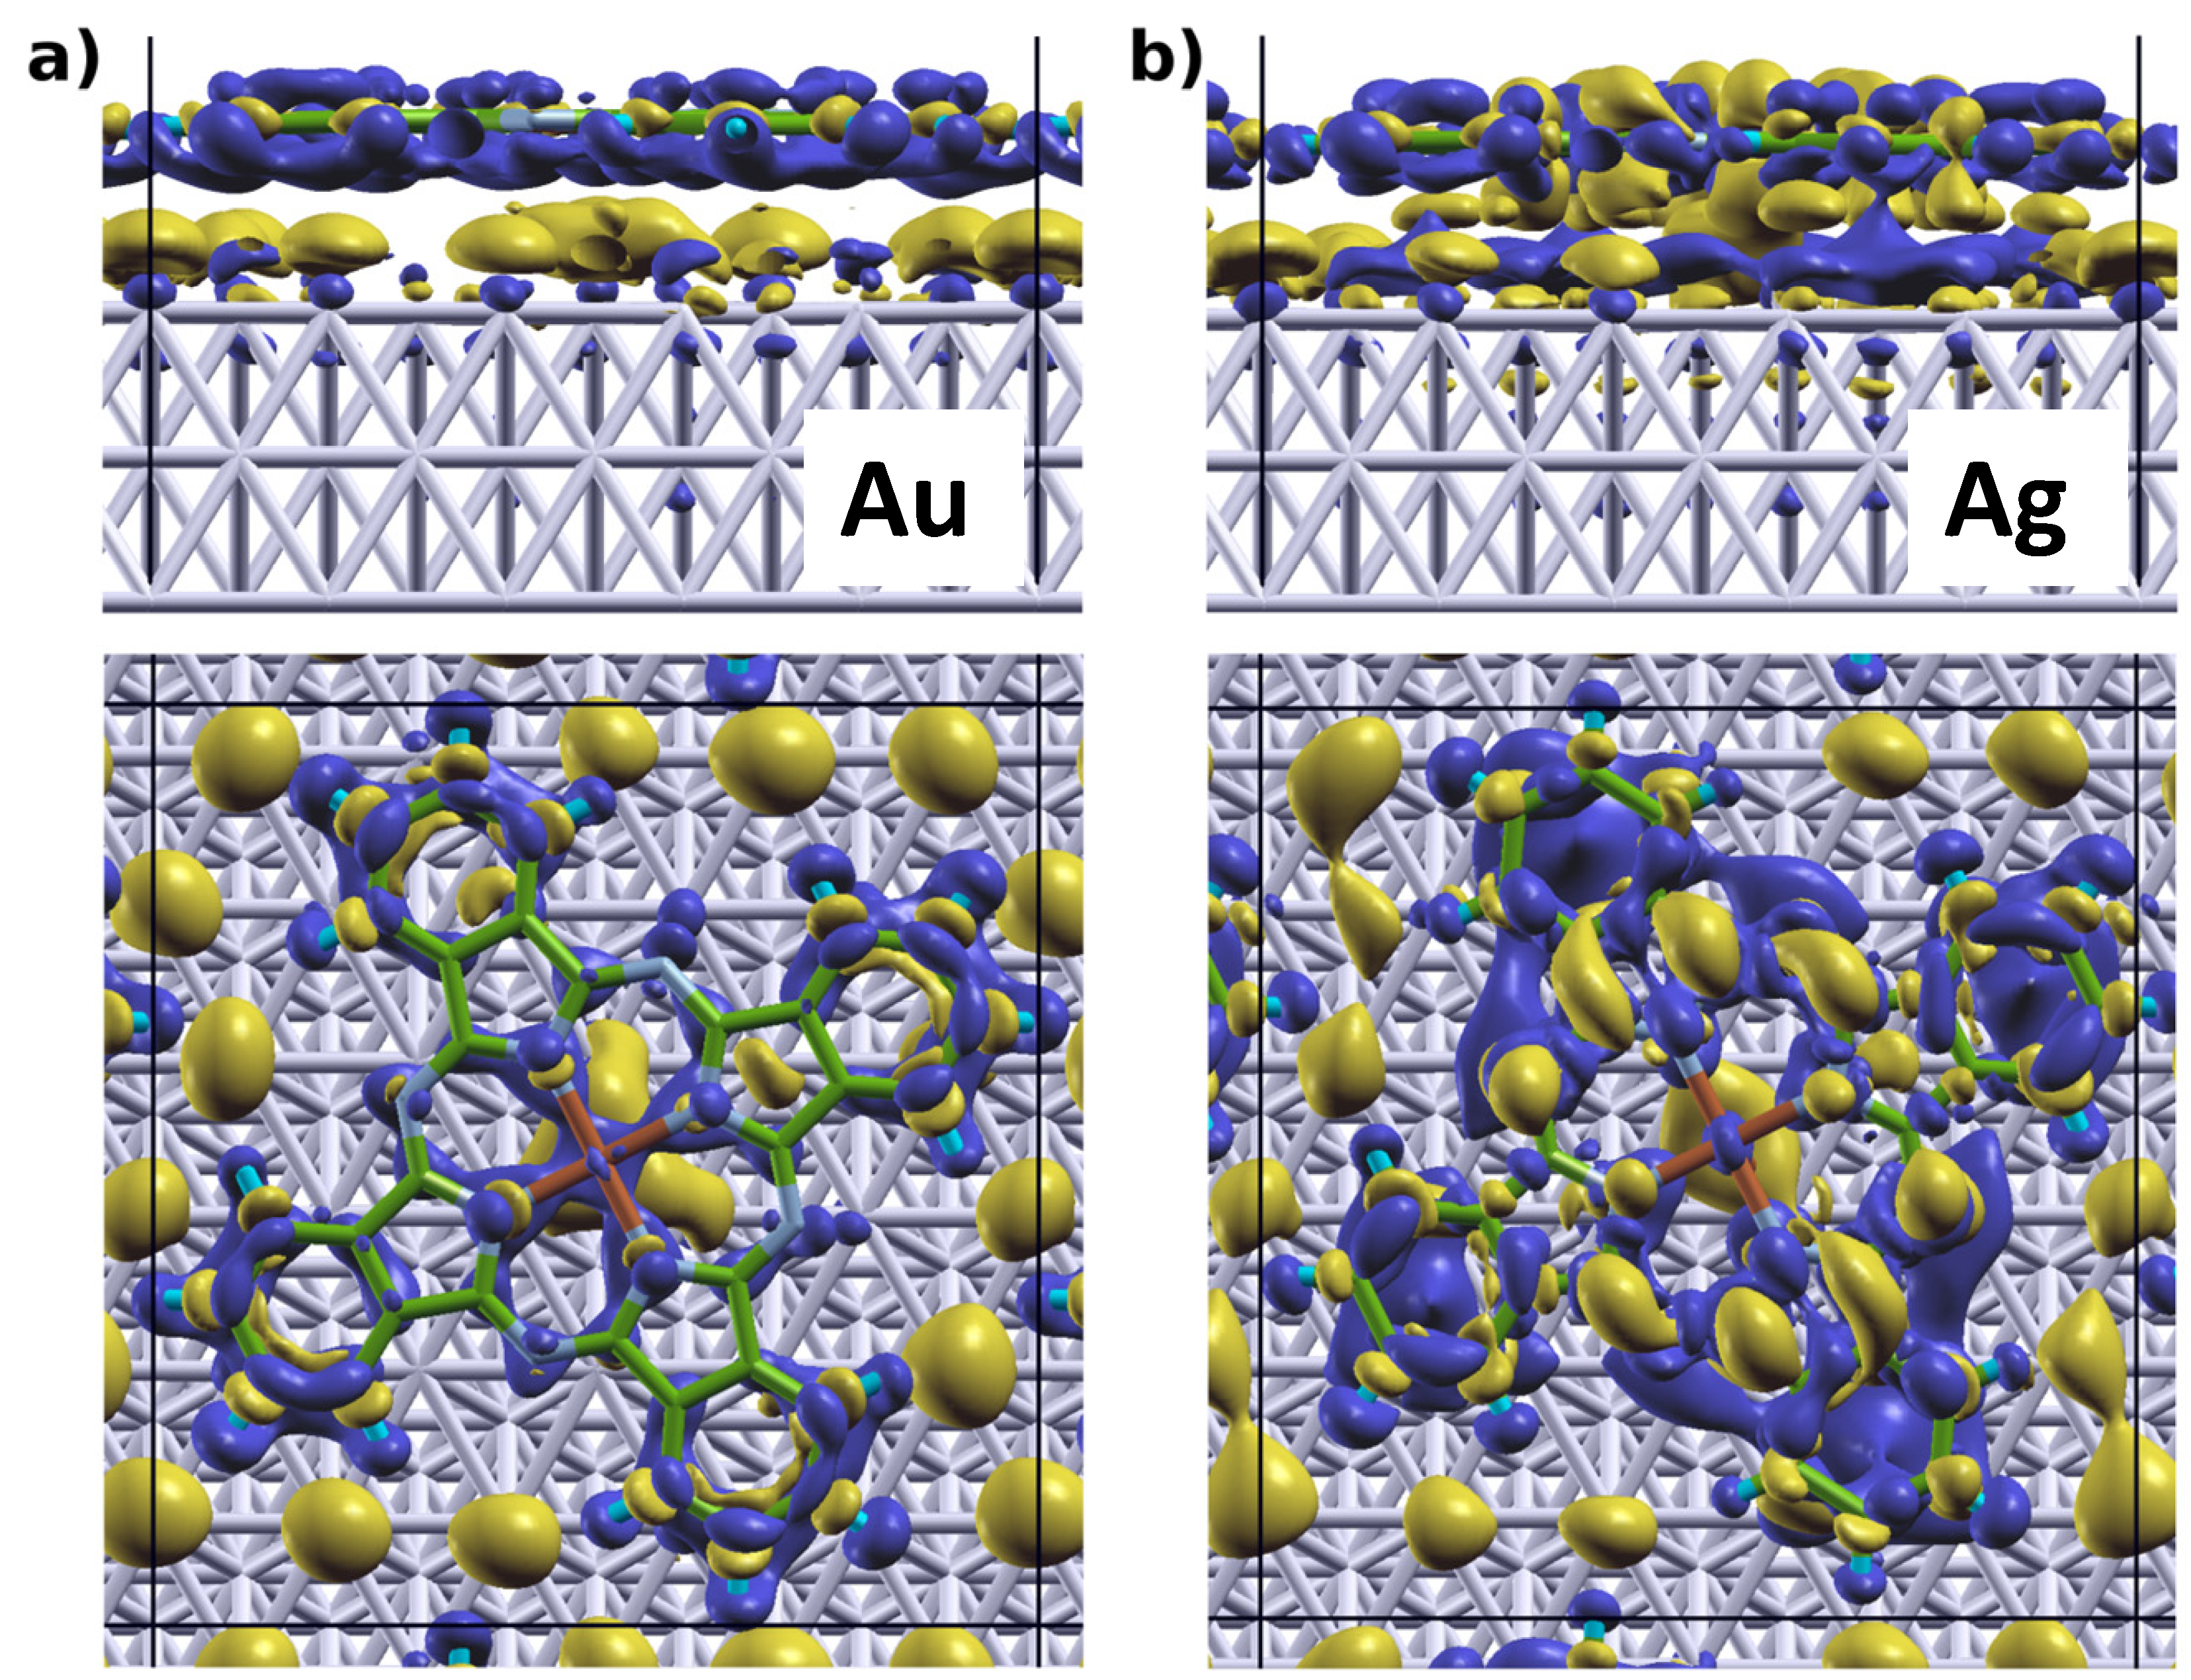 Molecules | Free Full-Text | the Adsorption of CuPc and on Noble Metal Surfaces by Combining Quantum-Mechanical Modelling and Photoelectron Spectroscopy | HTML